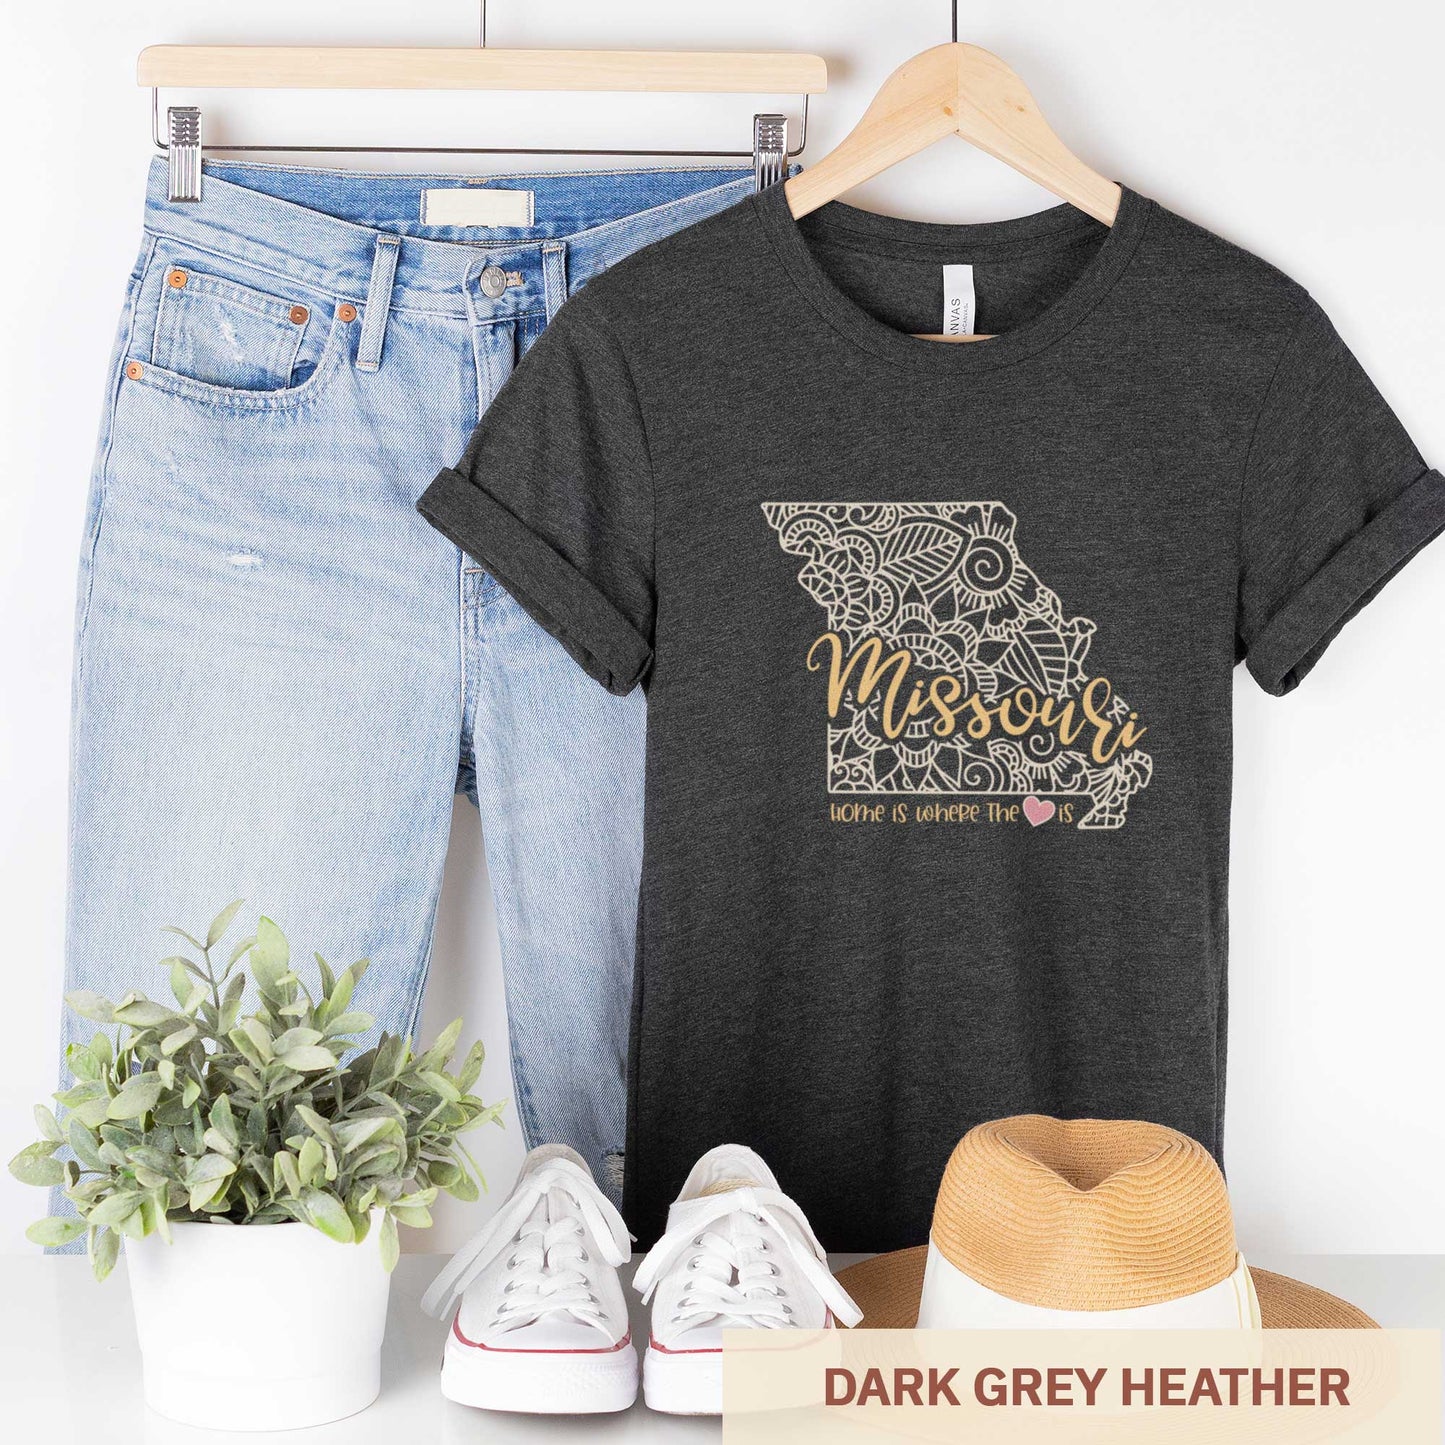 A hanging dark grey heather Bella Canvas t-shirt featuring a mandala in the shape of Missouri with the words home is where the heart is.